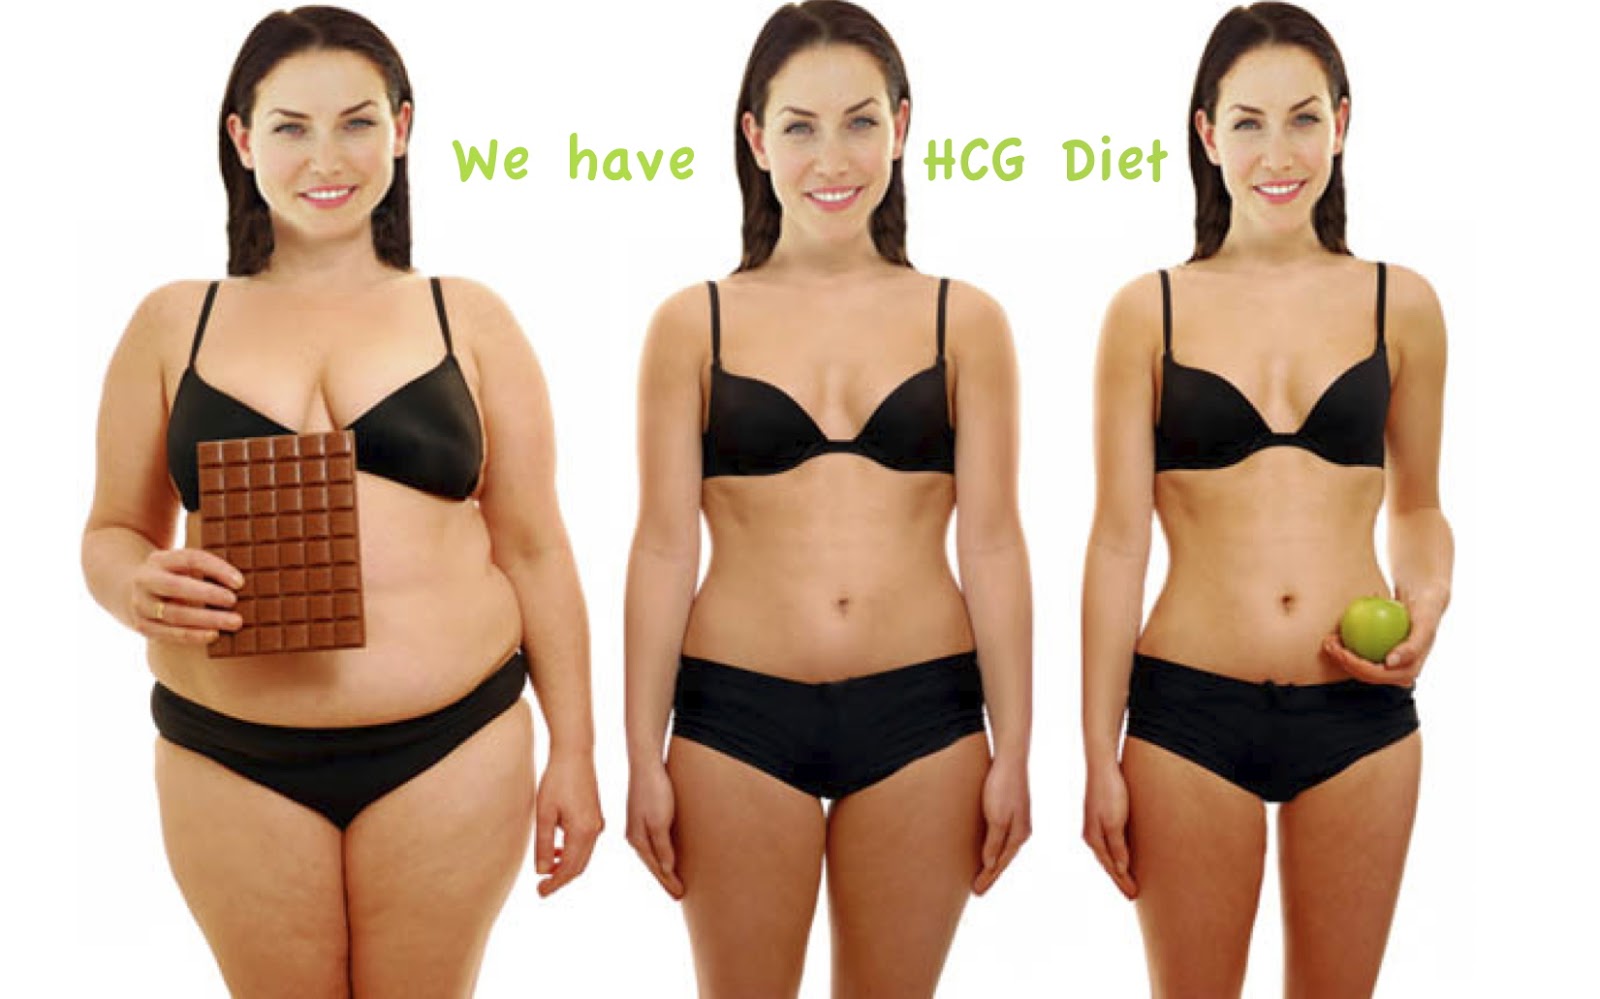 jademcke: Weight Loss Pills Hcg : How To Lose Weight Fast Without ...